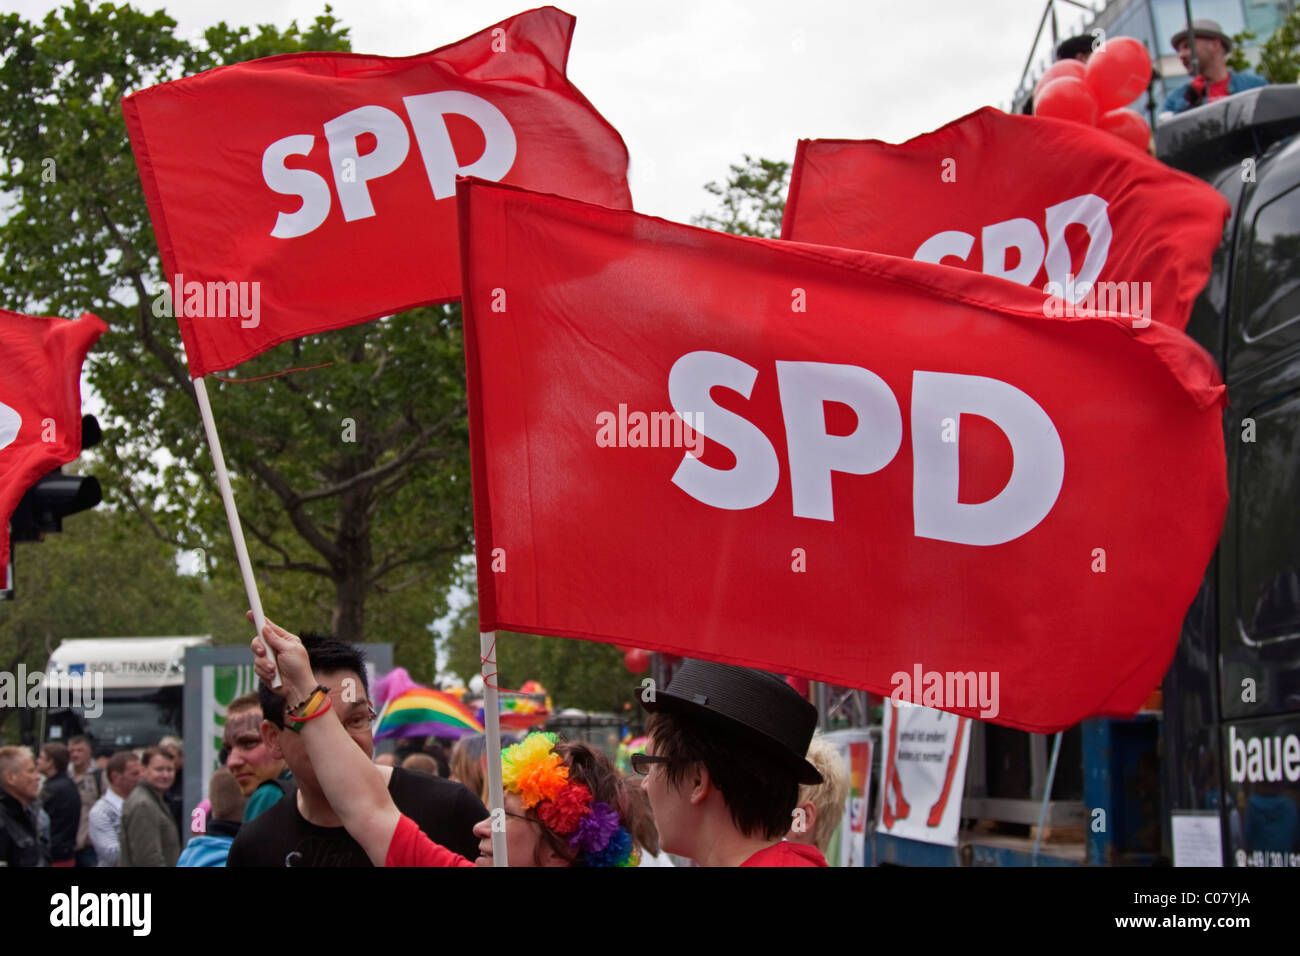 Flags of the SPD, Social Democratic Party of Germany, on the CSD Christopher Street Day in Berlin on 19 June 2010 Stock Photo